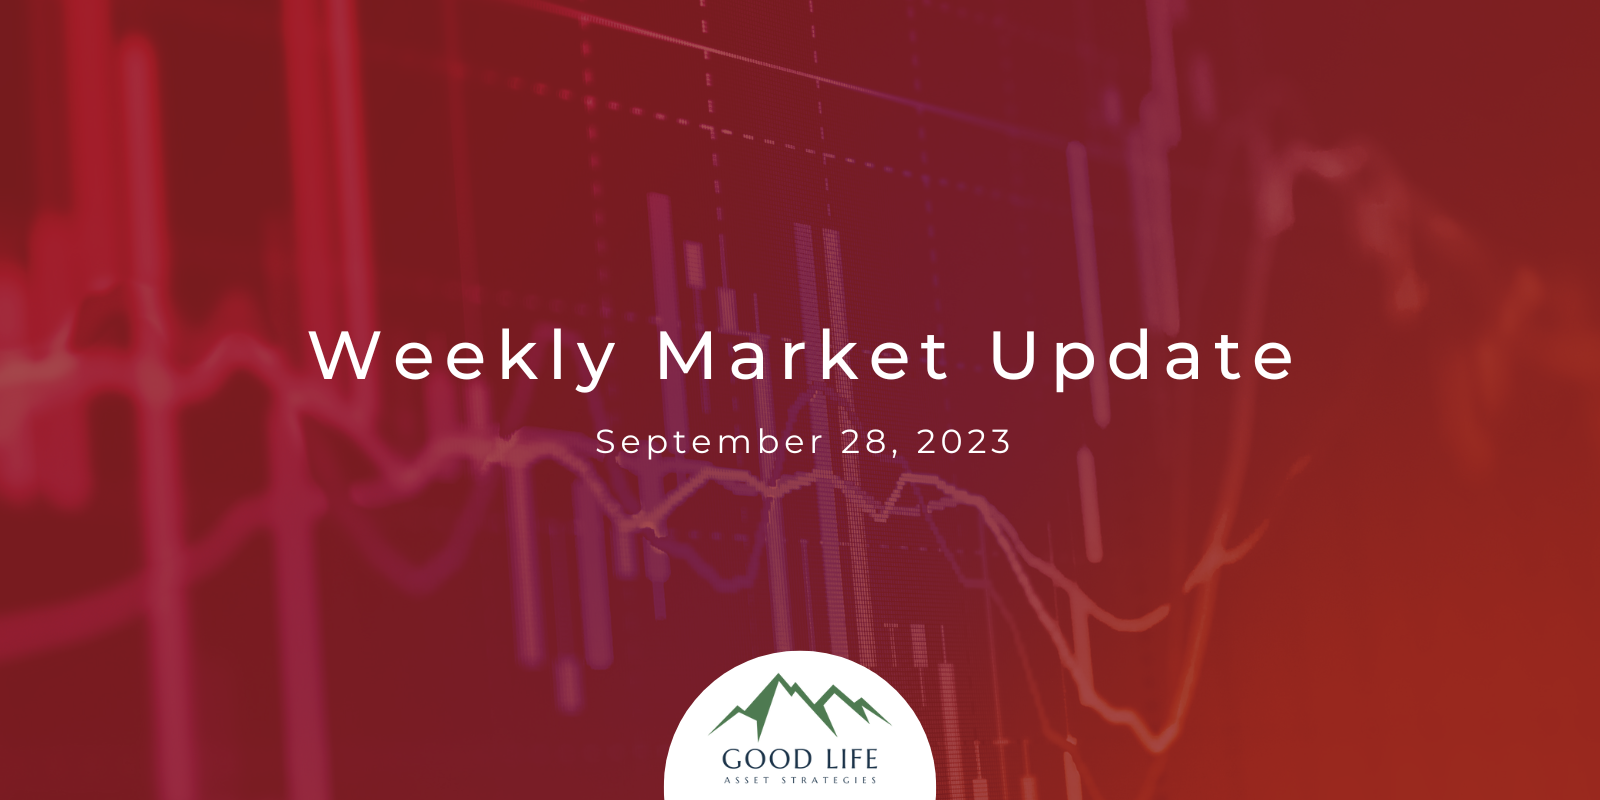 Weekly Market Update for September 28, 2023, from DeWayne Hall: Breakout in Stocks Favors the Bears